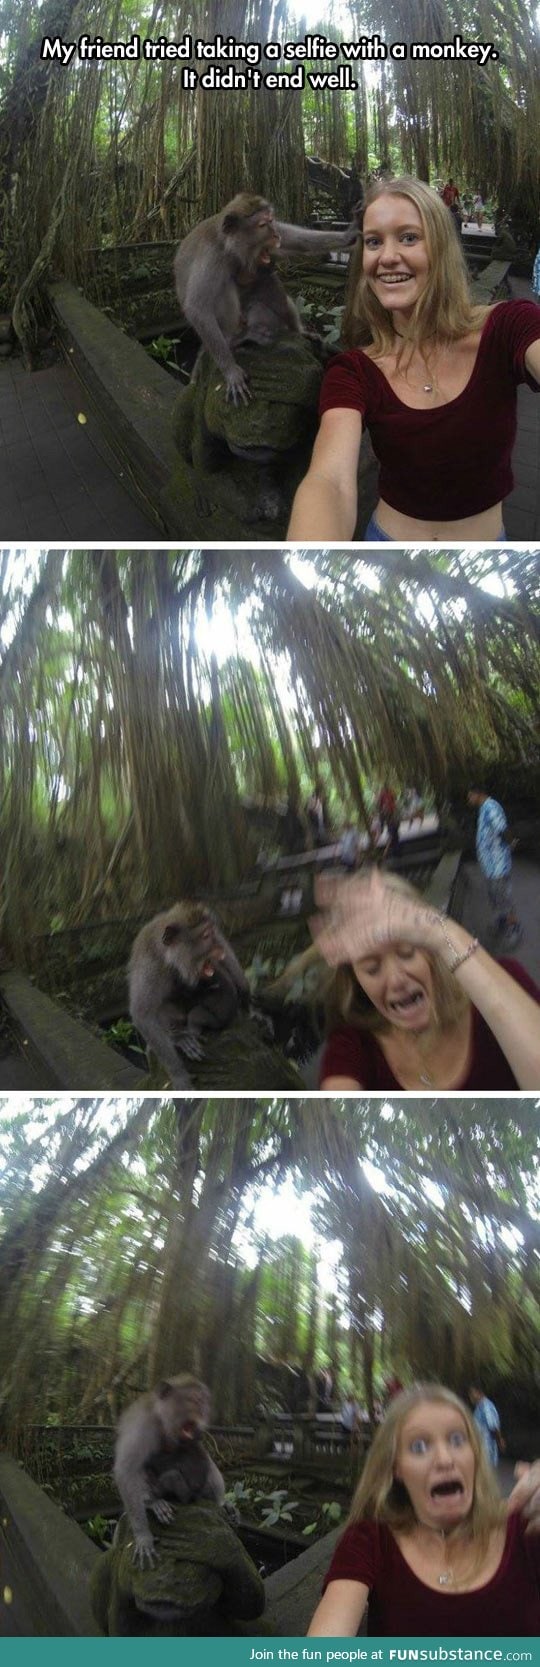 When your monkey selfies go wrong